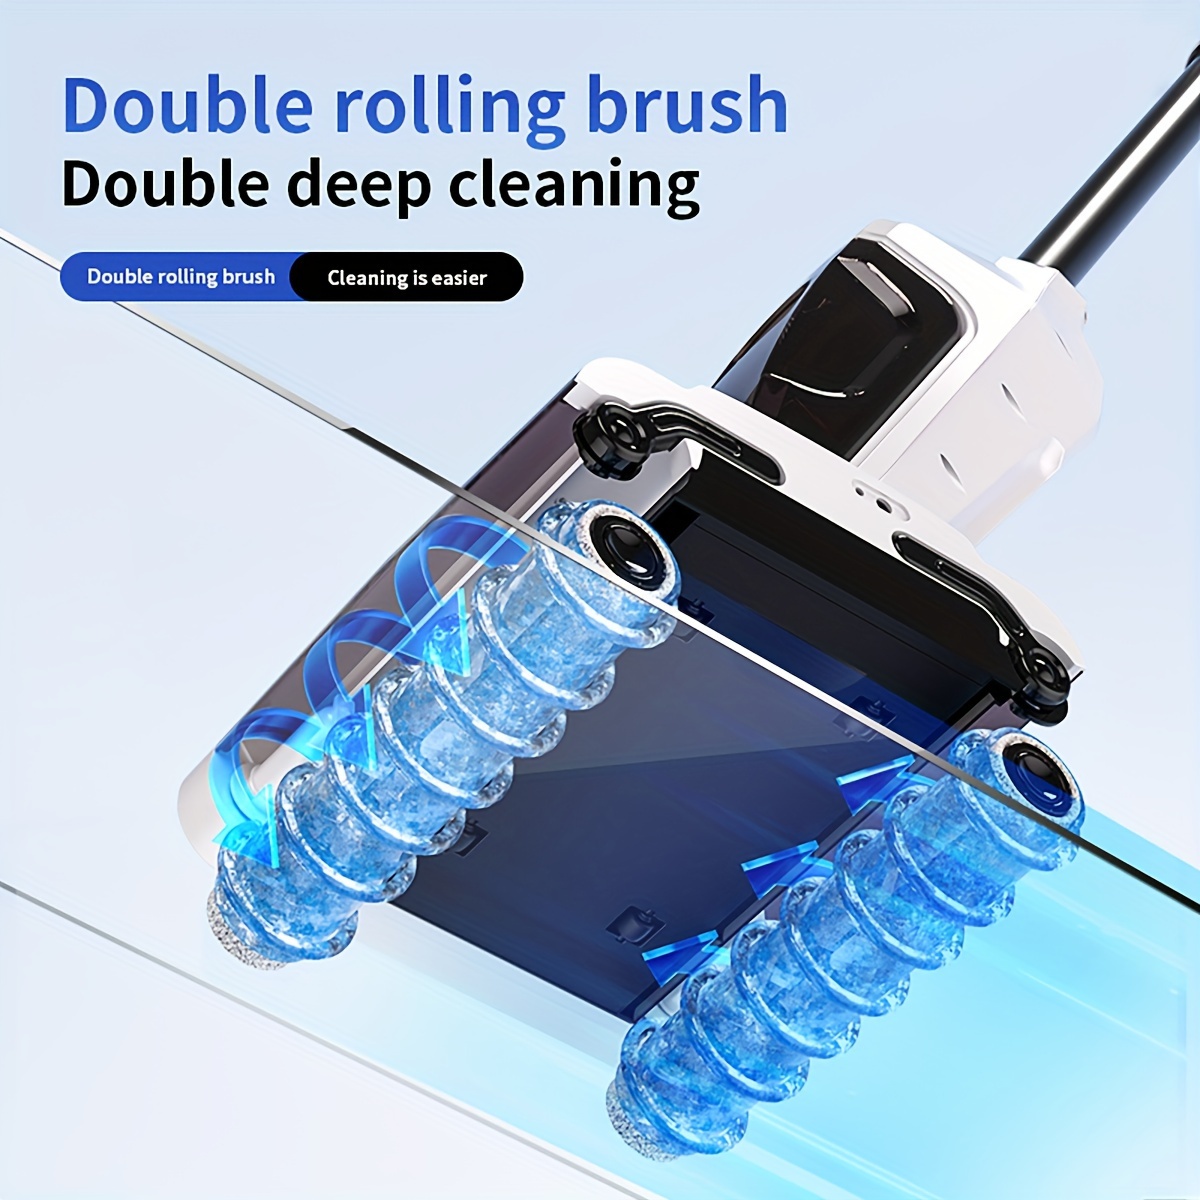 This  Electric Scrubber Has a Steep Double Discount This